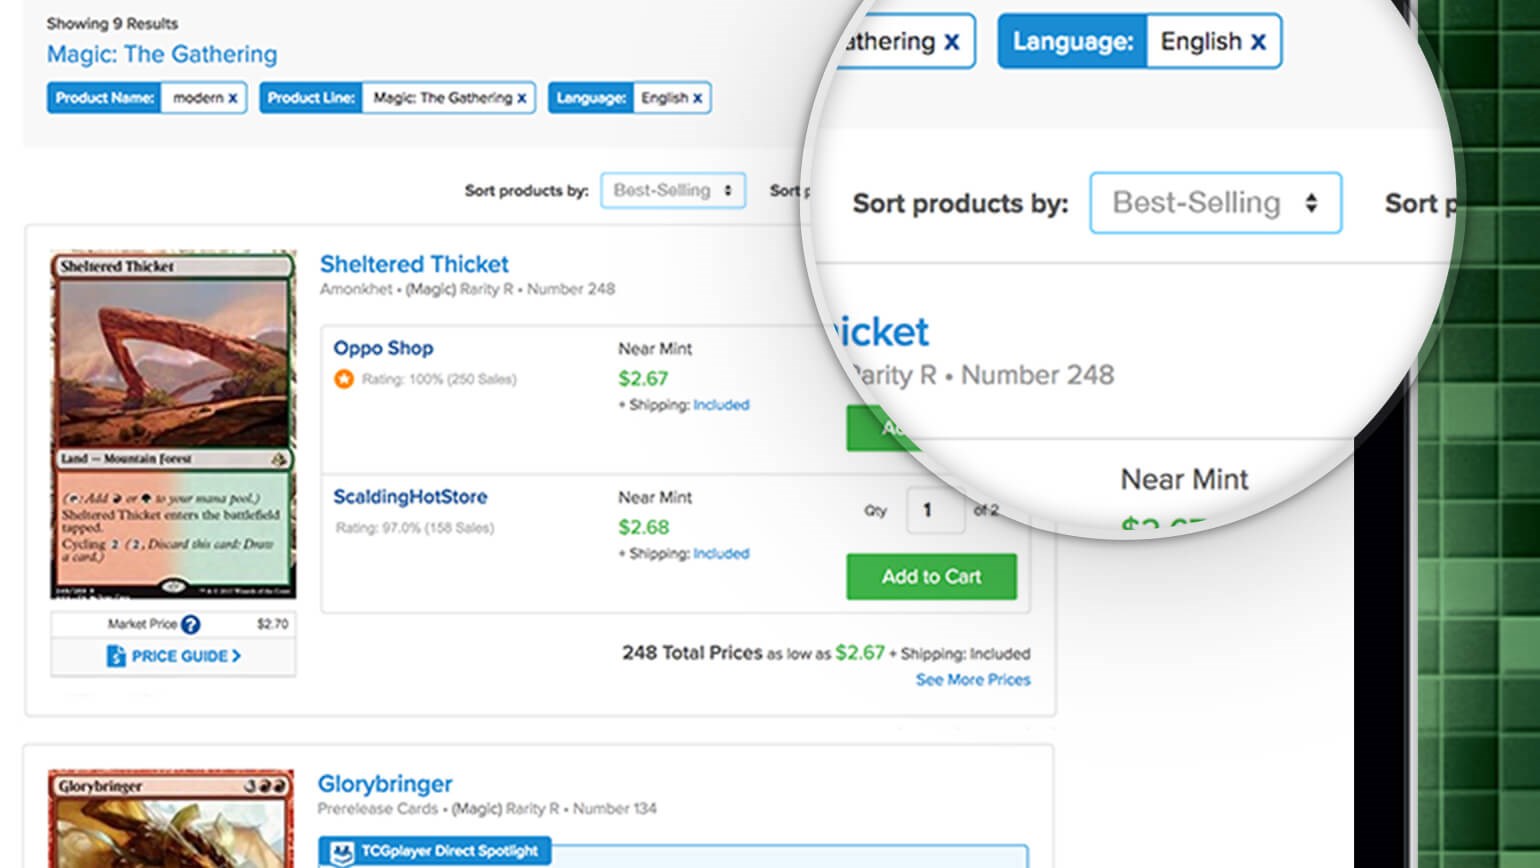 Coming June 28th: “Best-Selling” Sort Filter for Products